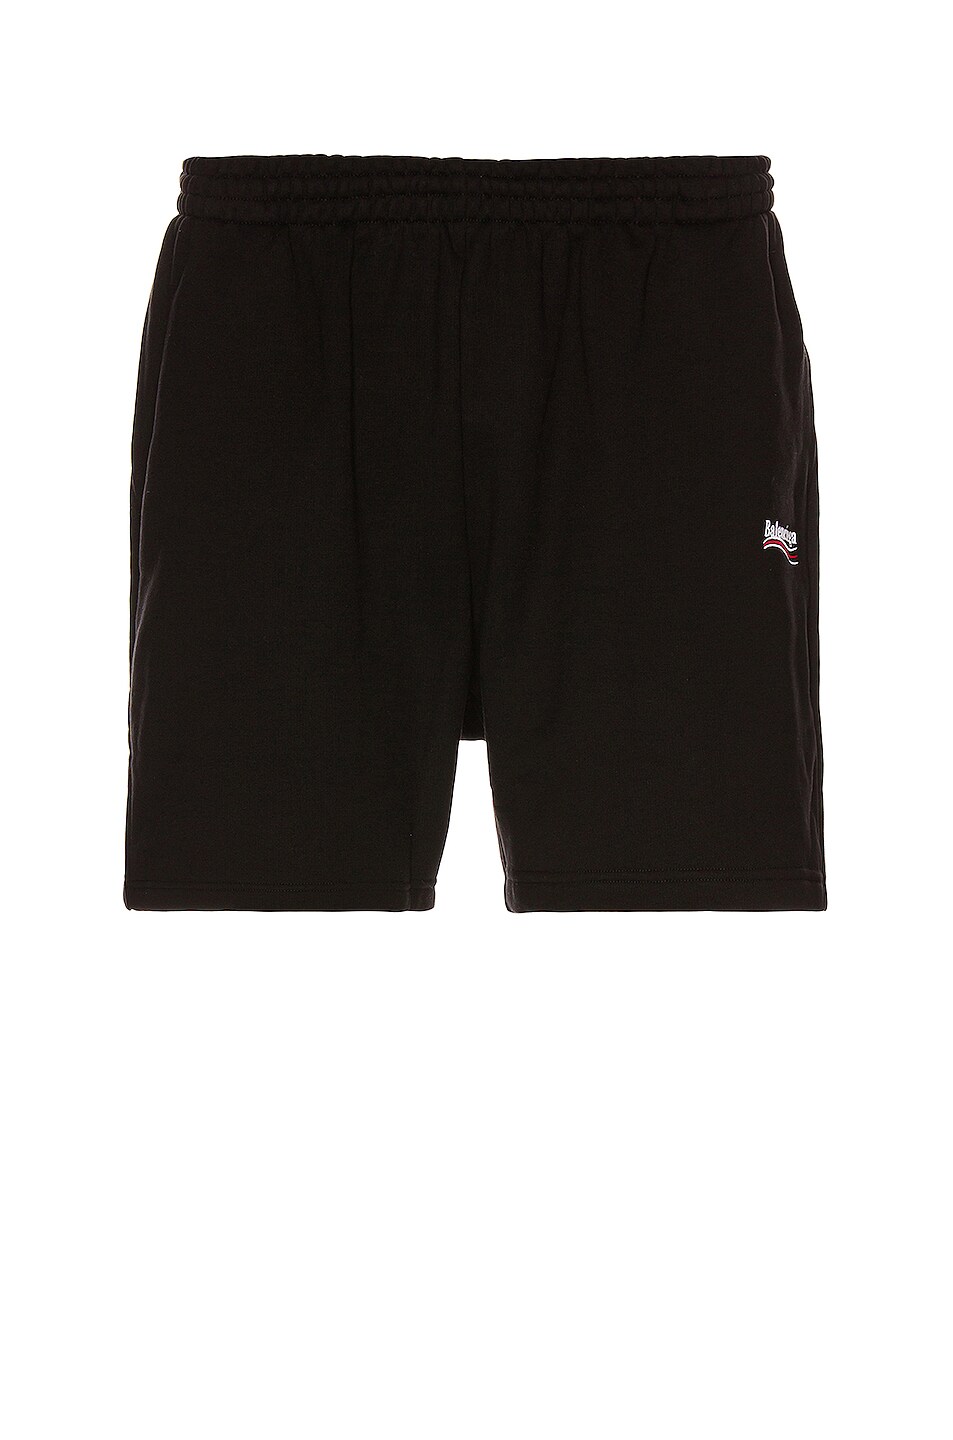 Image 1 of Balenciaga Campaign Sweat Shorts in Black & Whit